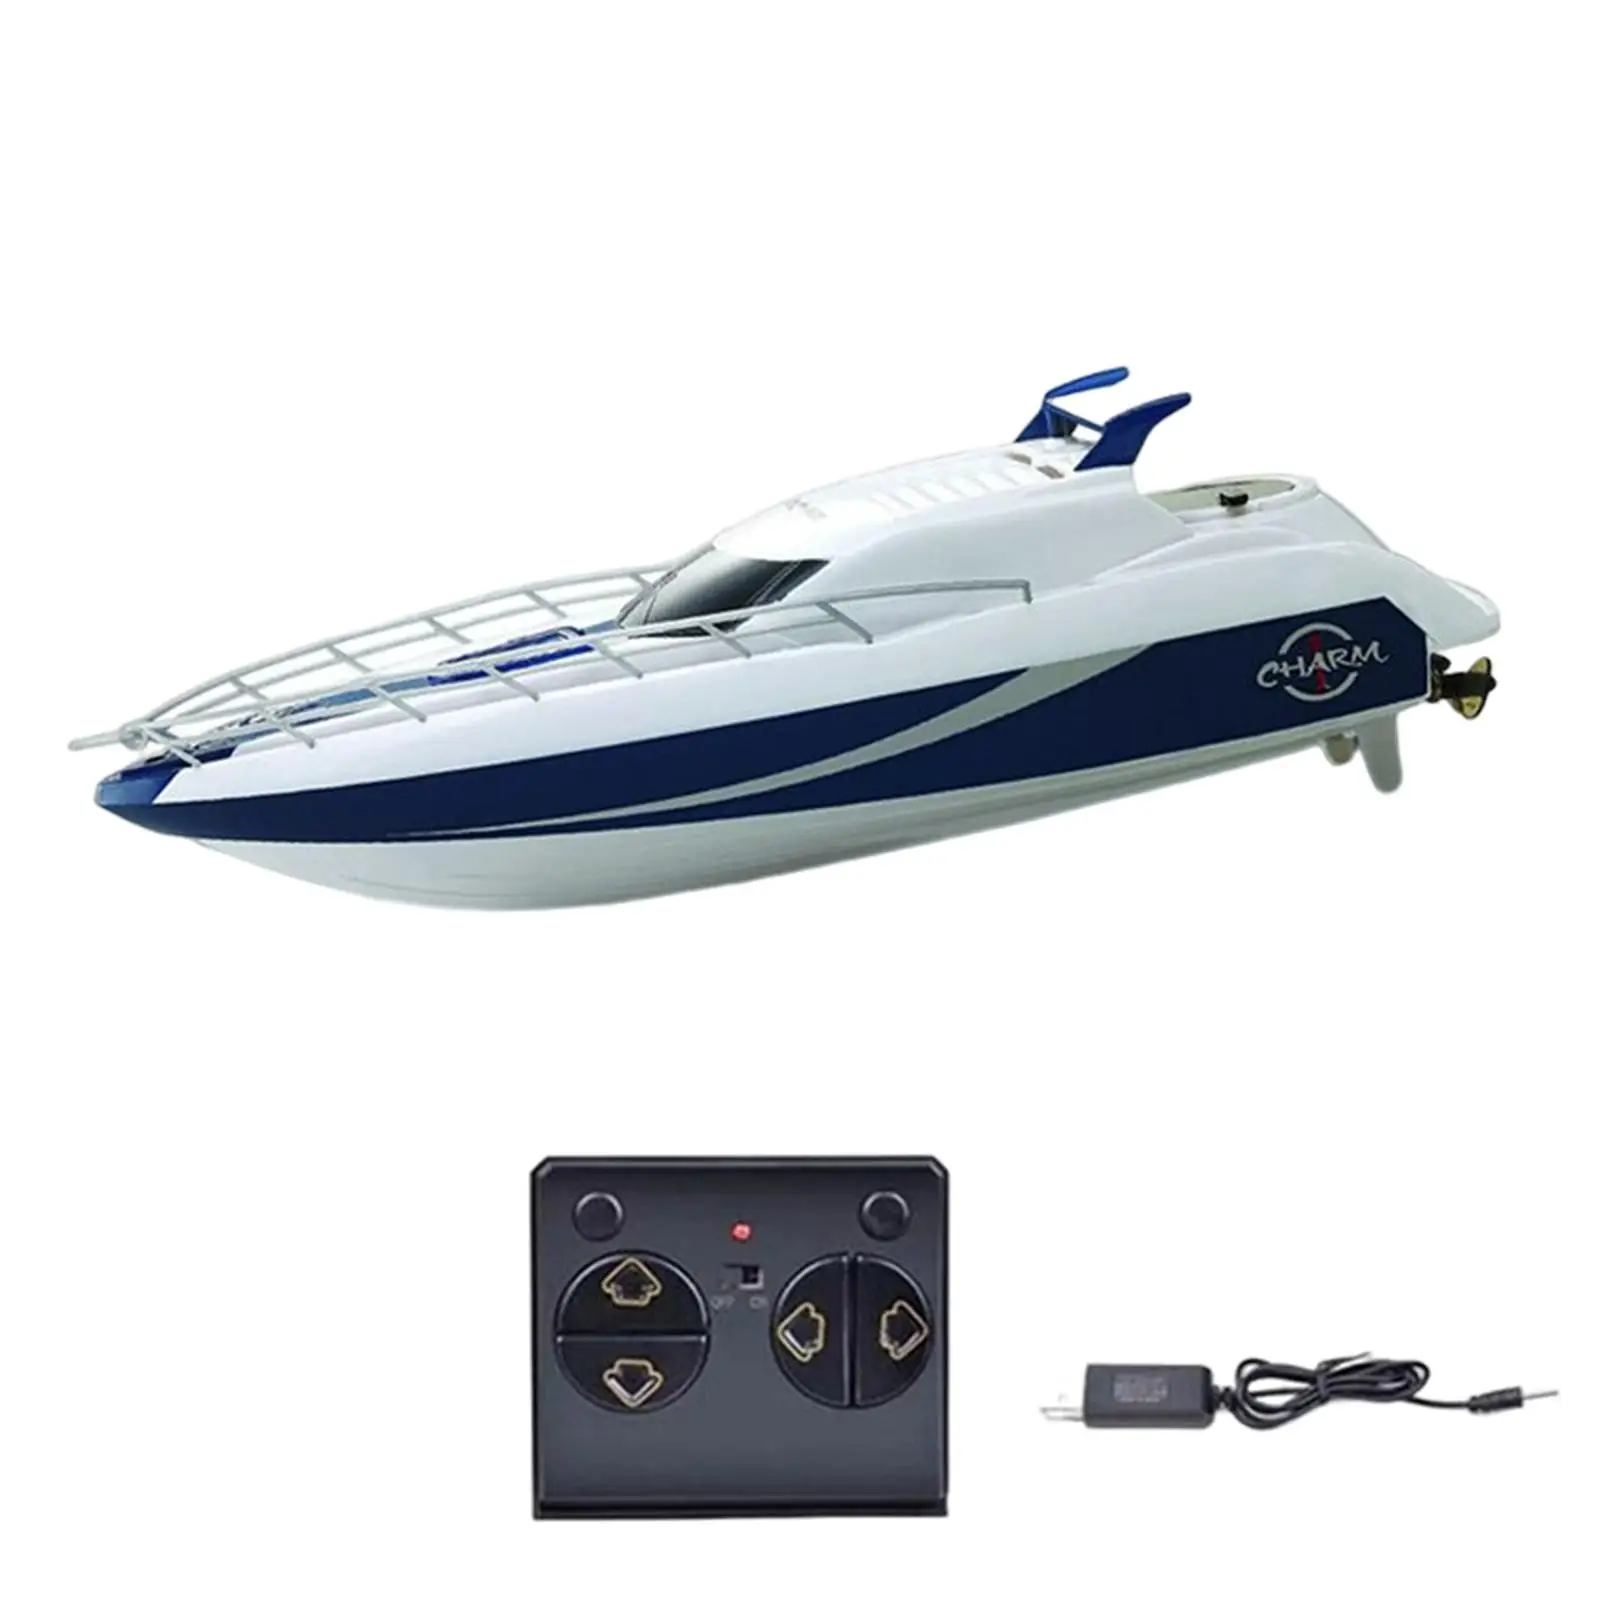 Portable Remote Control Boat Speedboat USB Rechargeable RC Boat Warship Model for Children Boys Beginner Girls Gifts